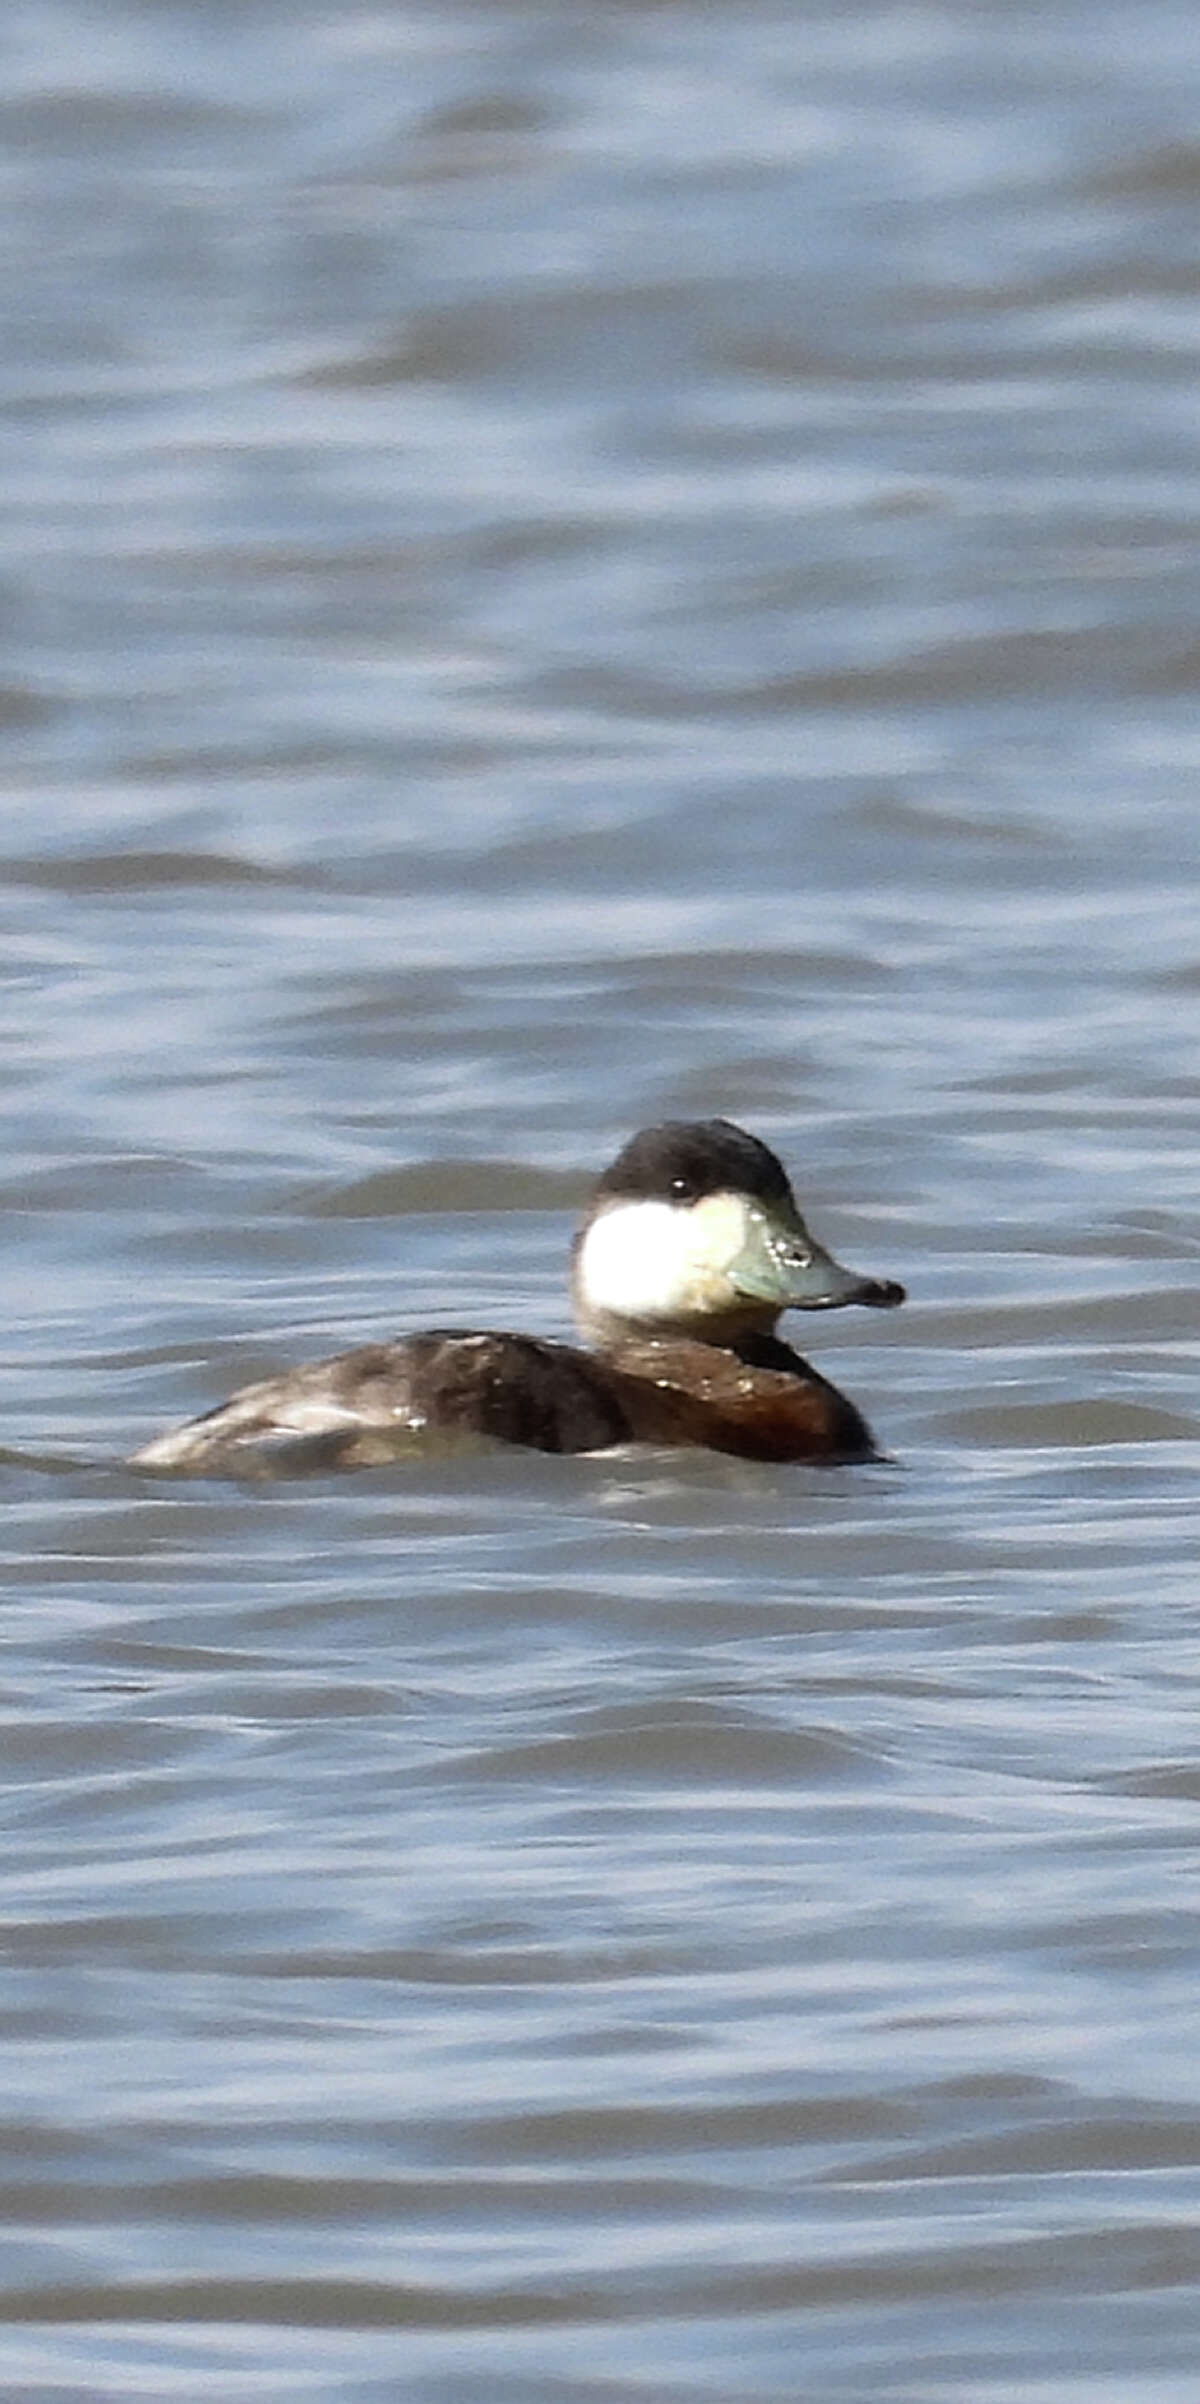 A ruddy duck floats gracefully in the waters of Meredosia Lake.